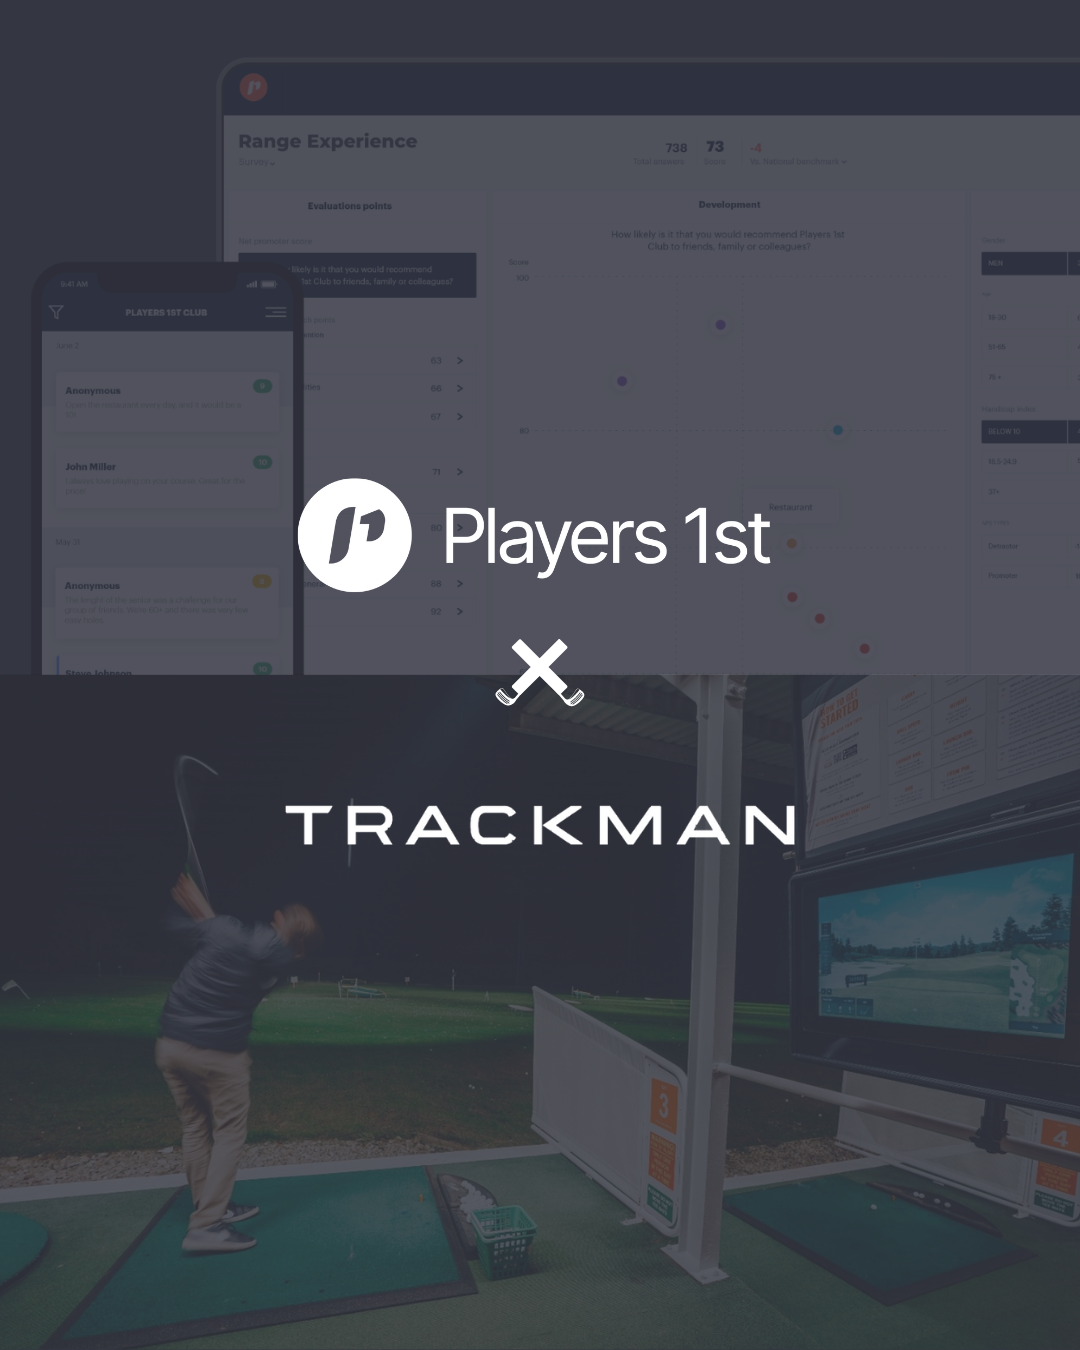 TrackMan Ranges can now reach thousands of players through Players 1st; Trackman and Players 1st partnership; customer experience management for golf clubs